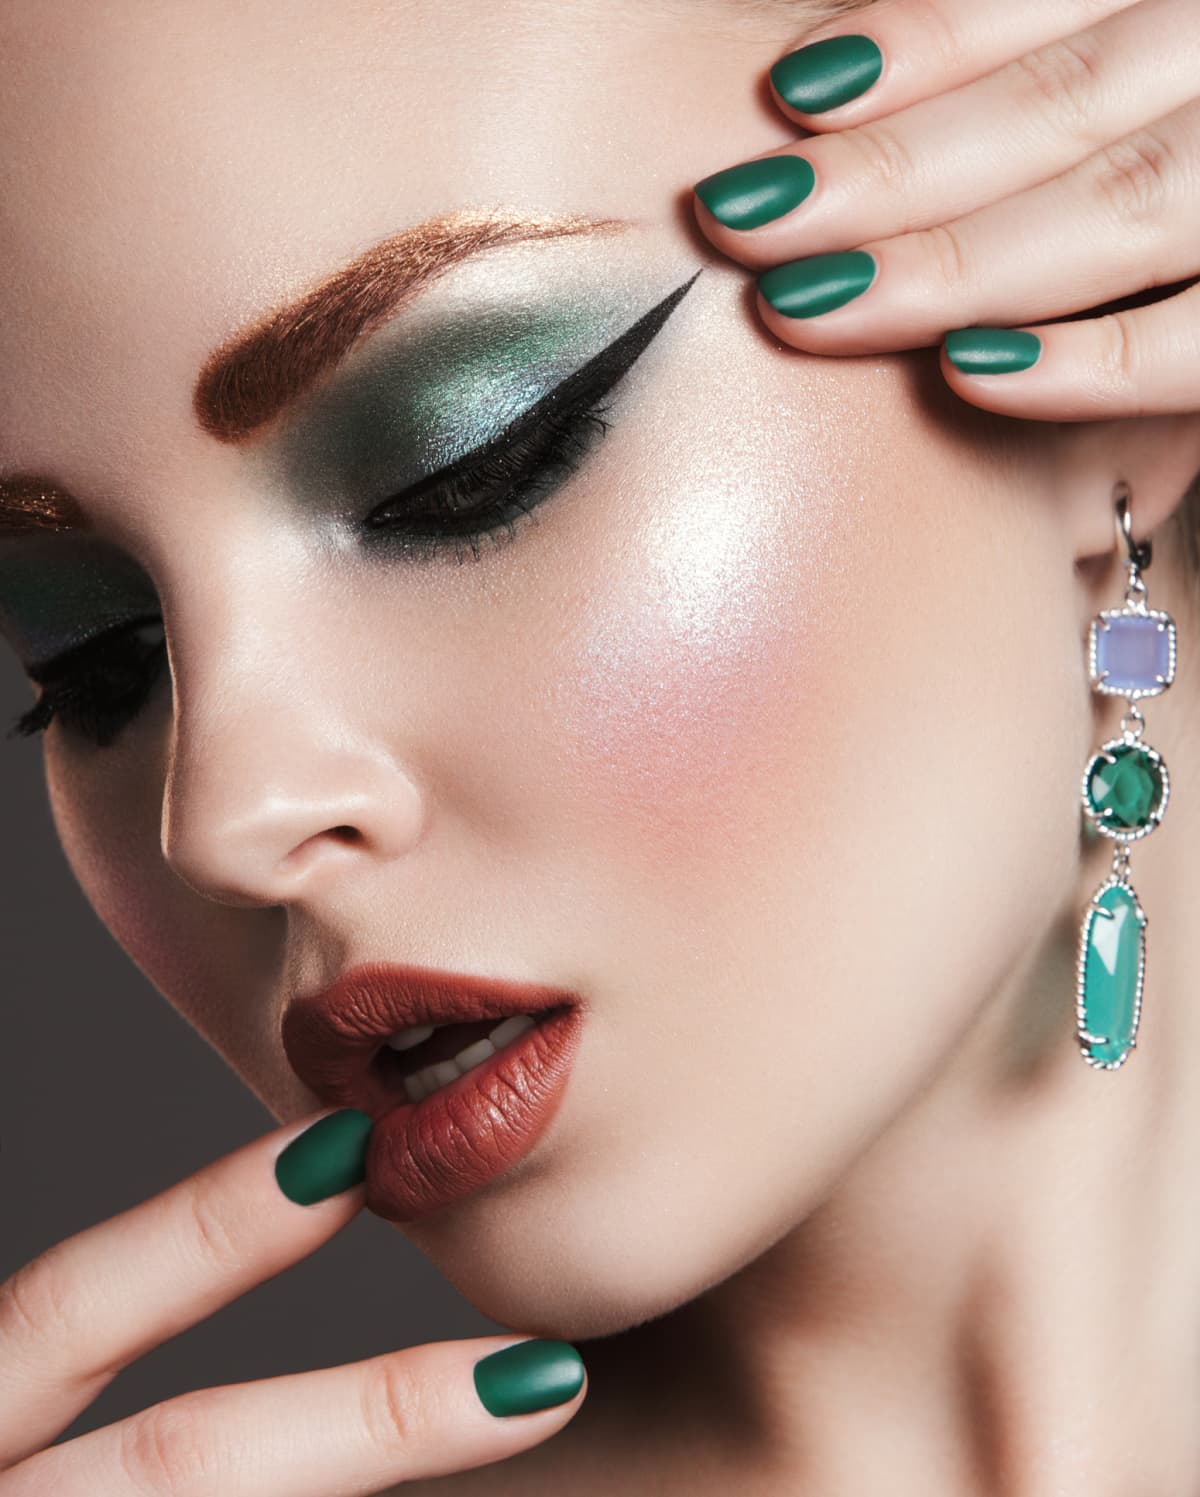 Woman with bright make-up and manicure